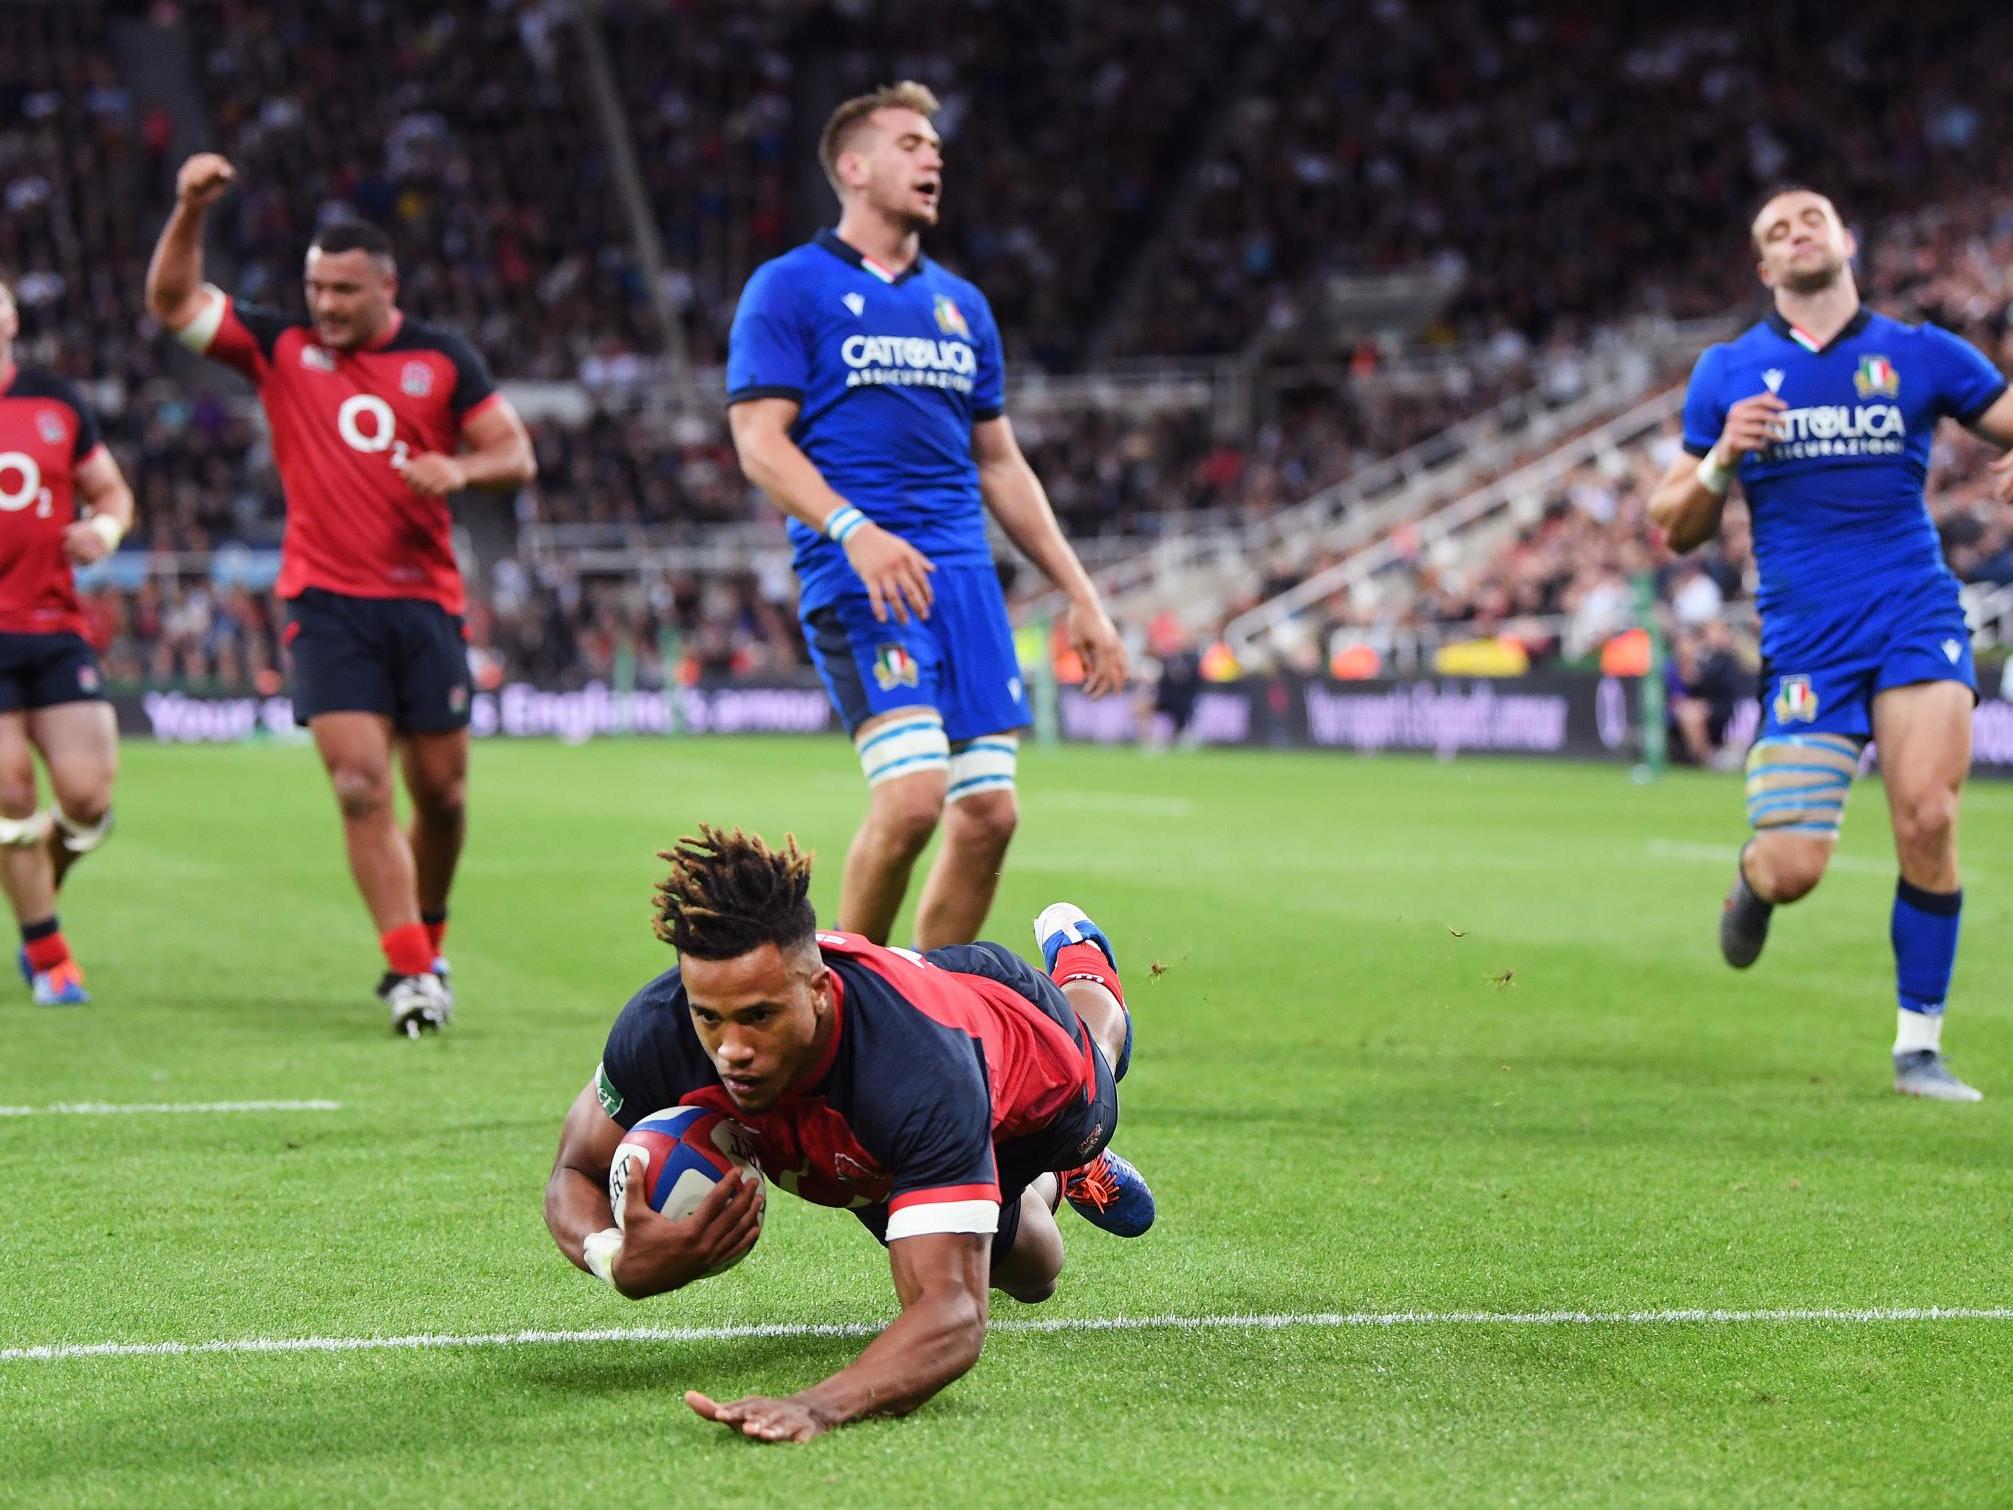 Rugby World Cup 2019: Injury concerns overshadow England win against Italy in final World Cup warm-up